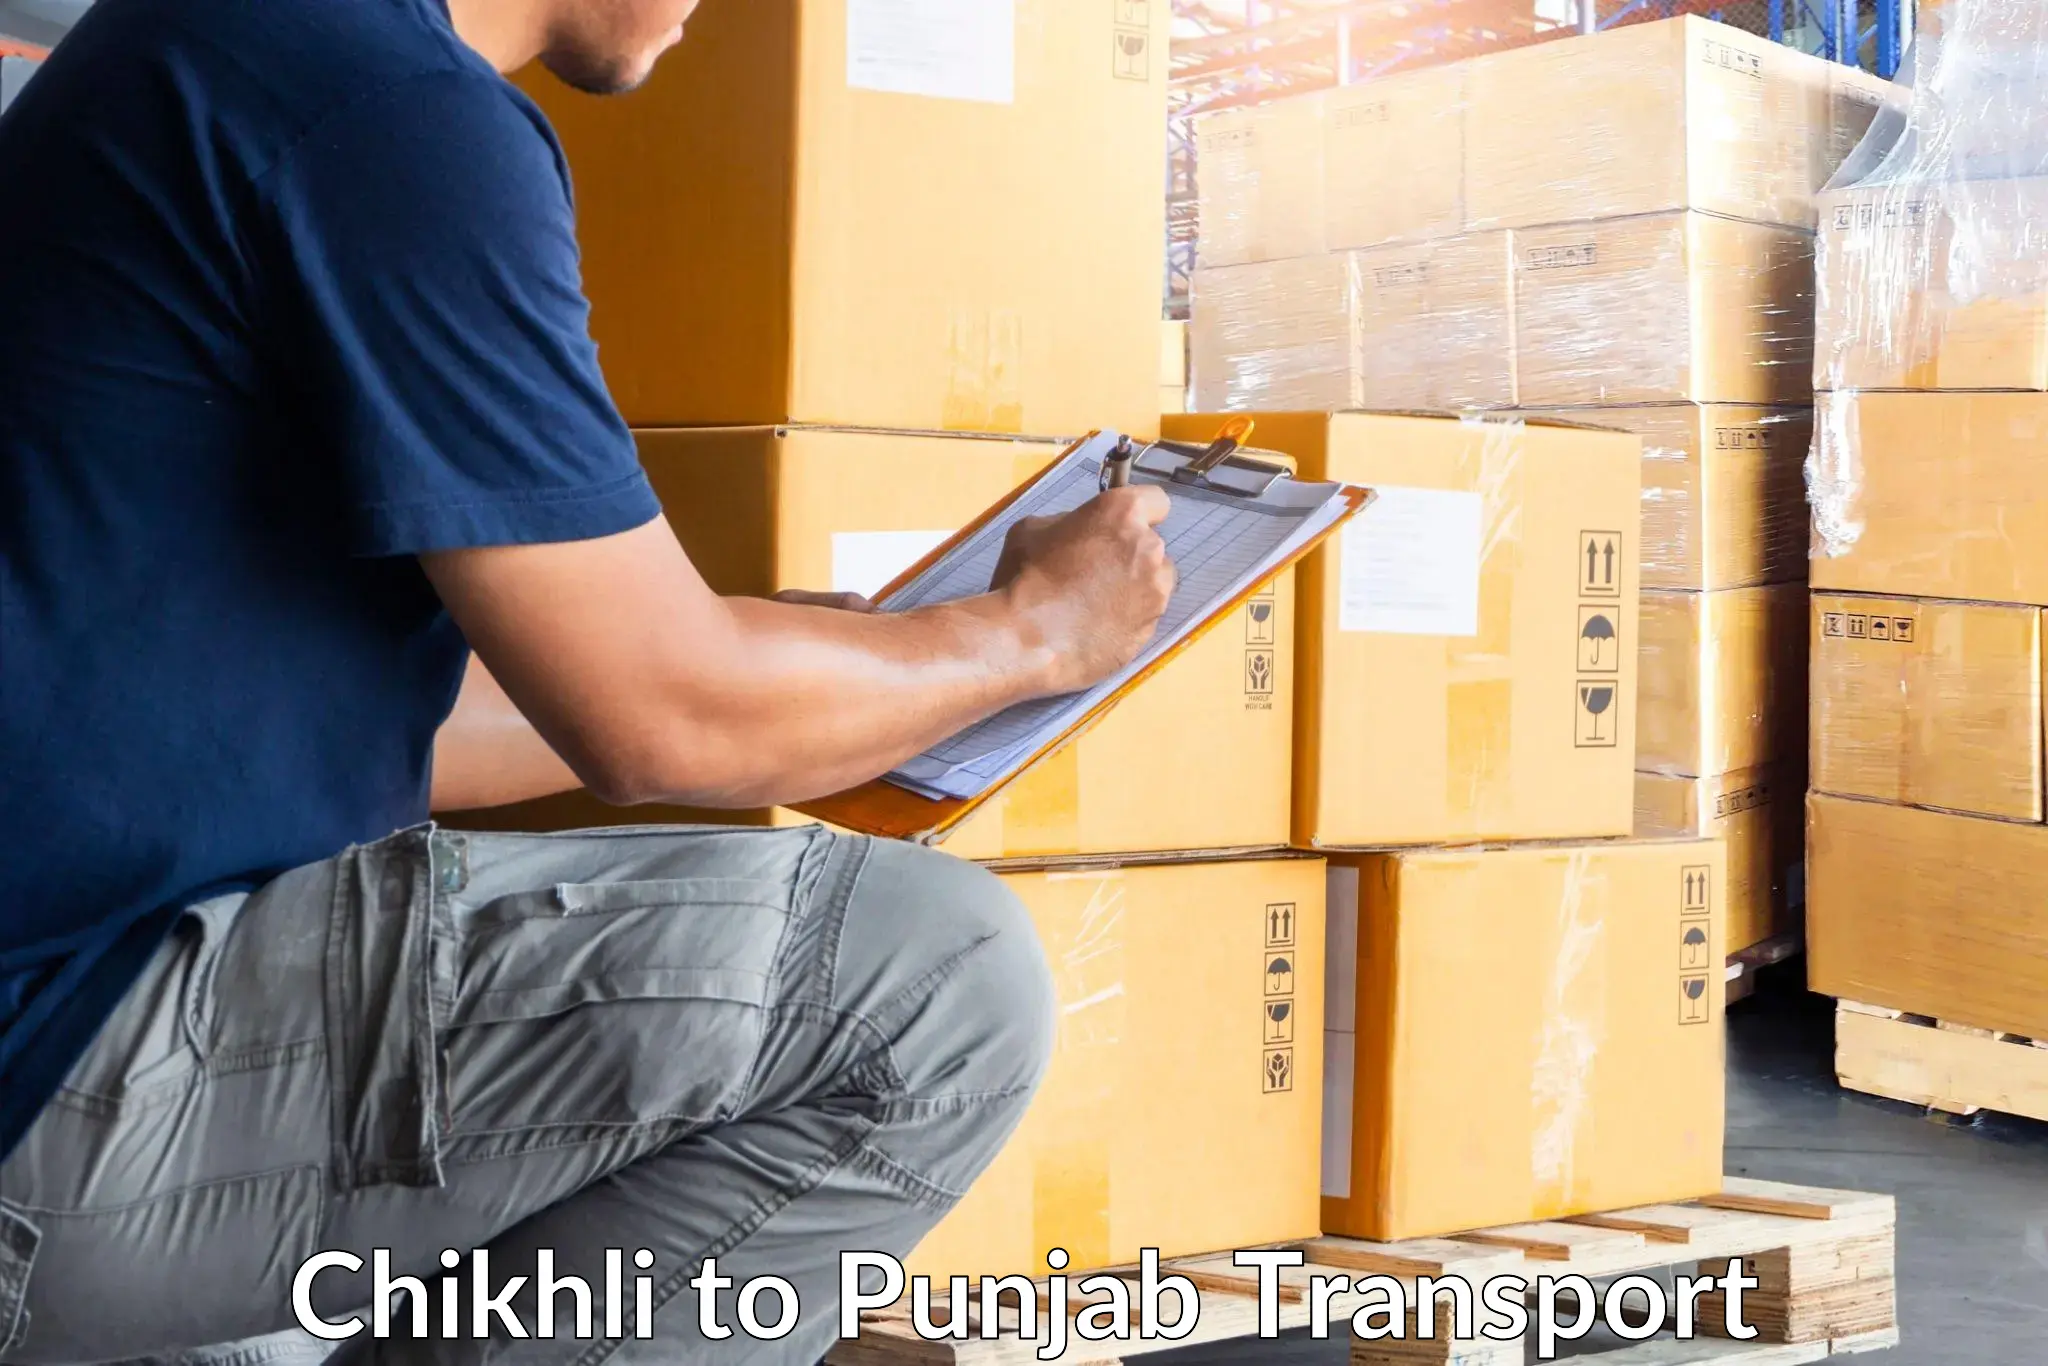 Express transport services in Chikhli to Faridkot